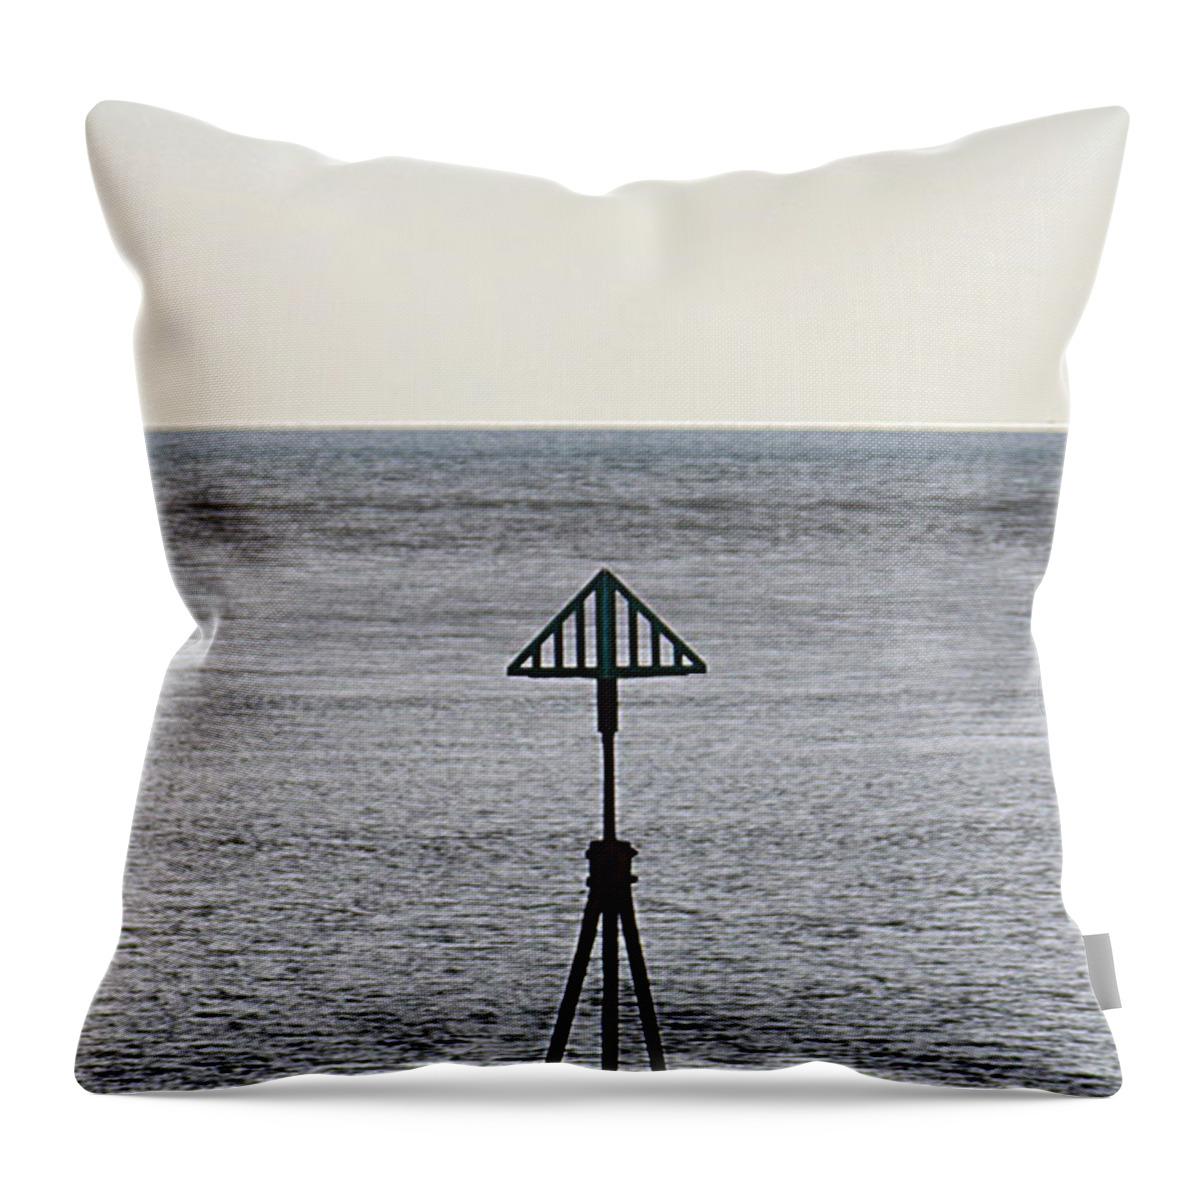 Marker Throw Pillow featuring the photograph Marker by Andy Thompson